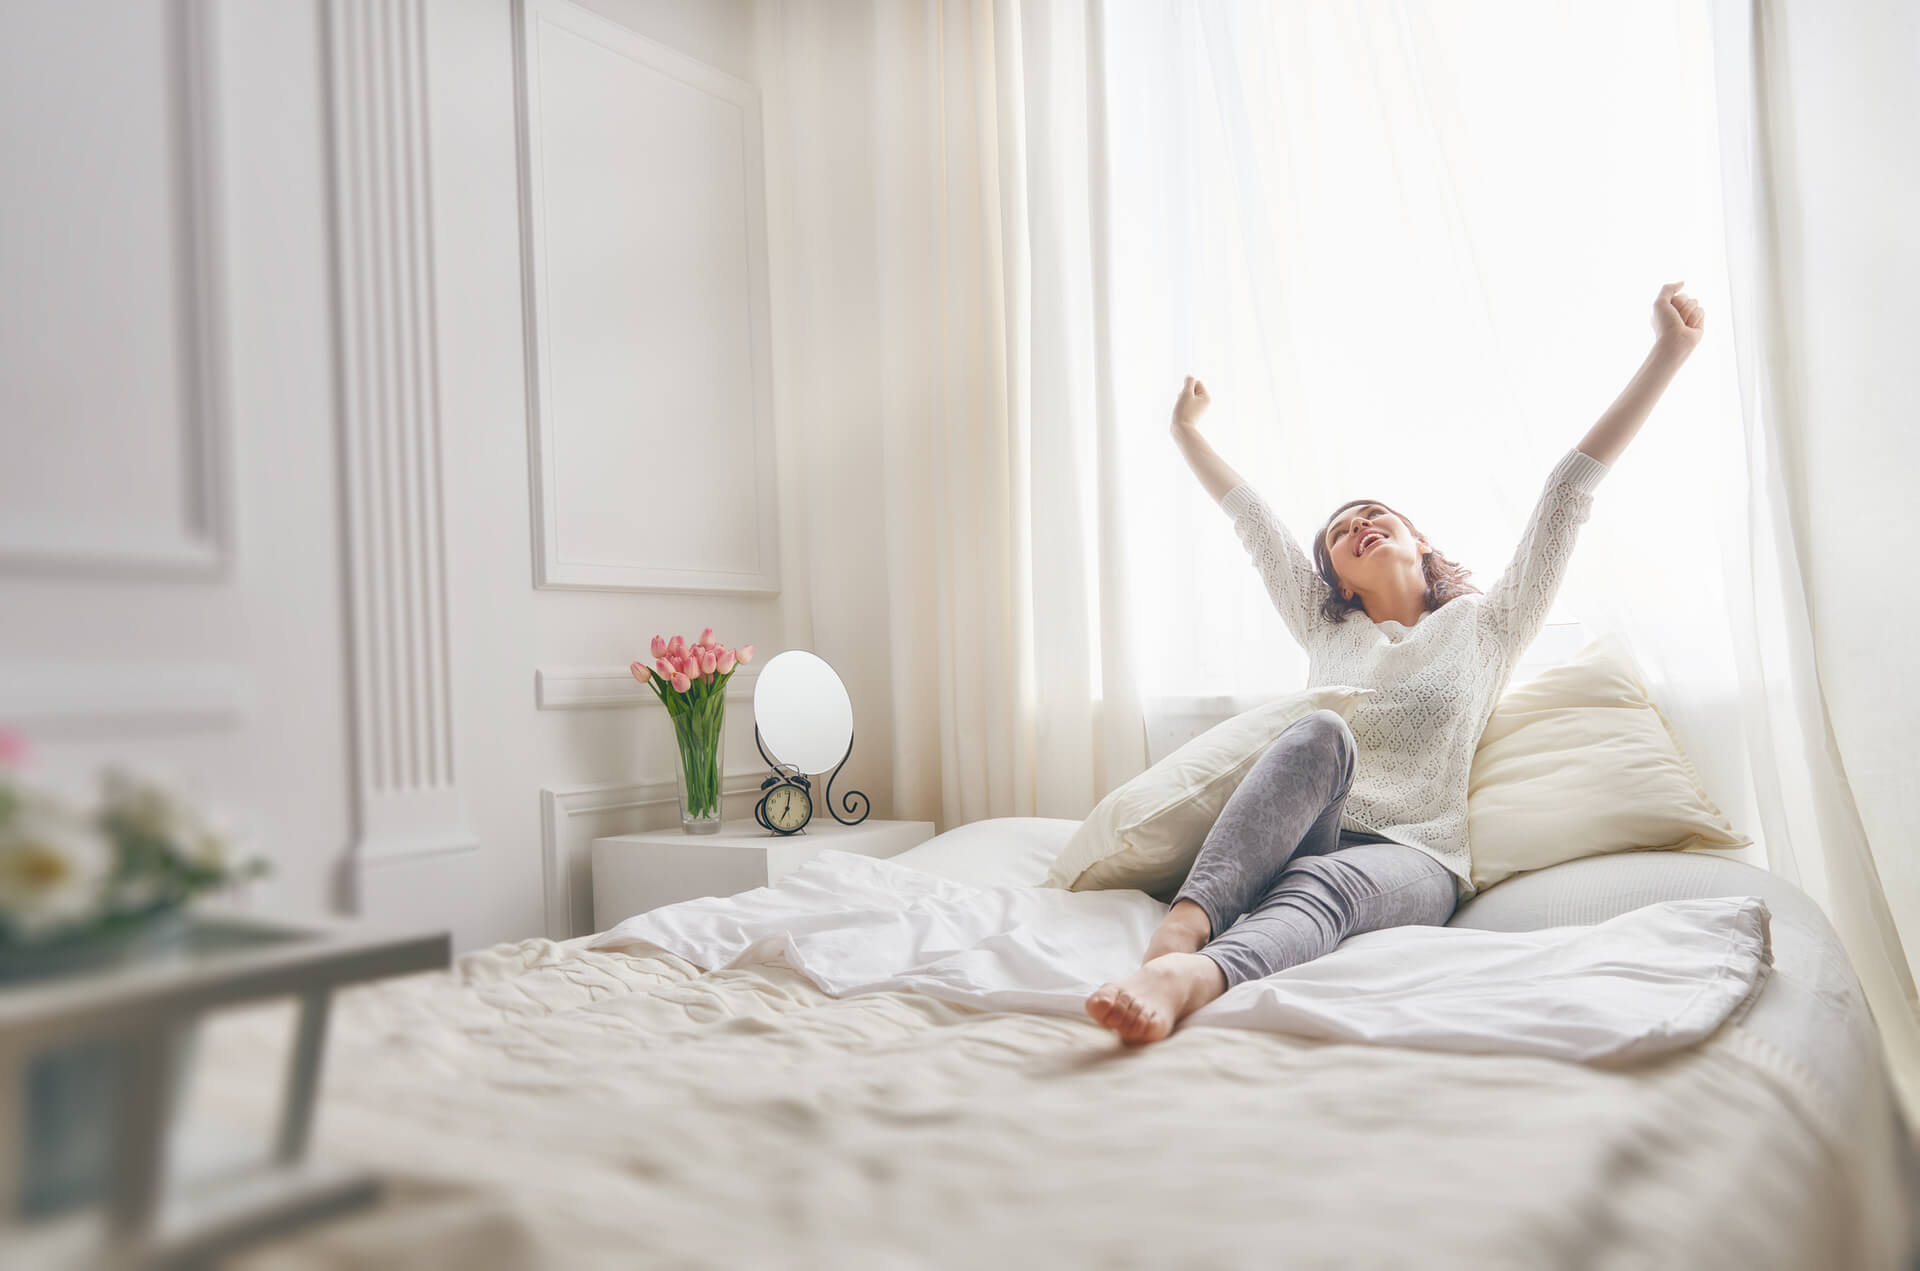 Woman is far too happy to be awake in the morning